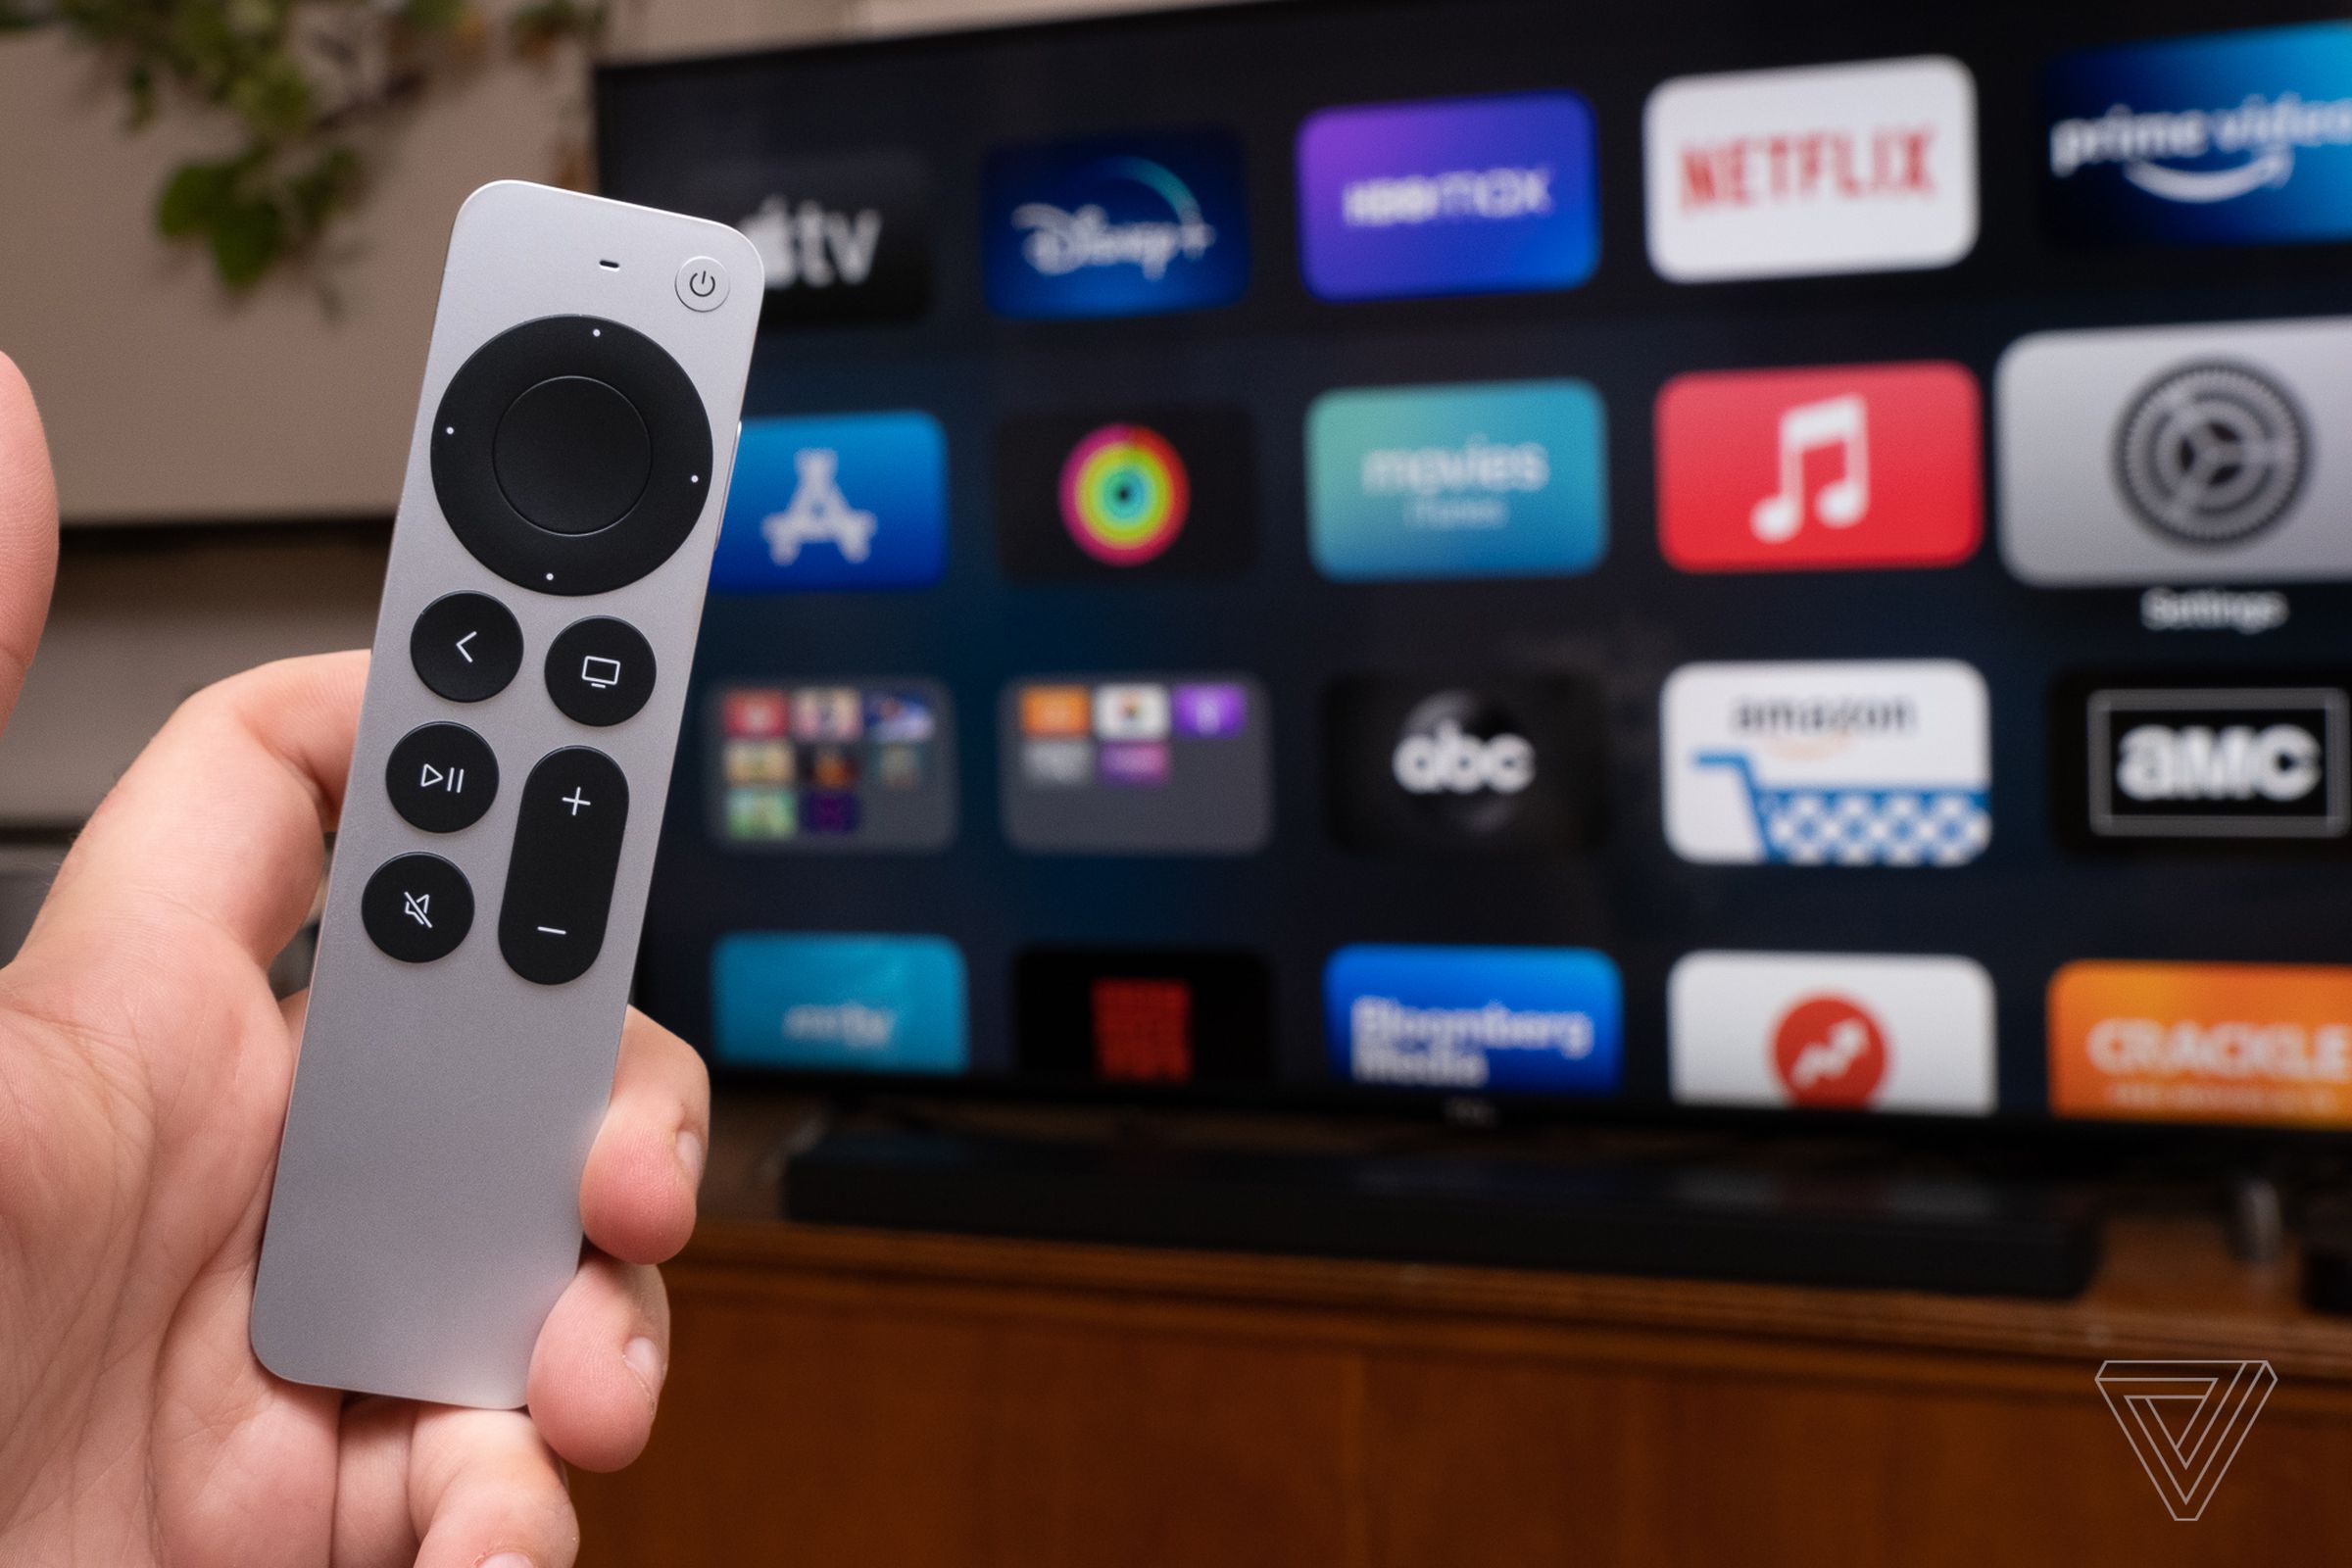 Apple has added power and mute buttons to the new Siri Remote.